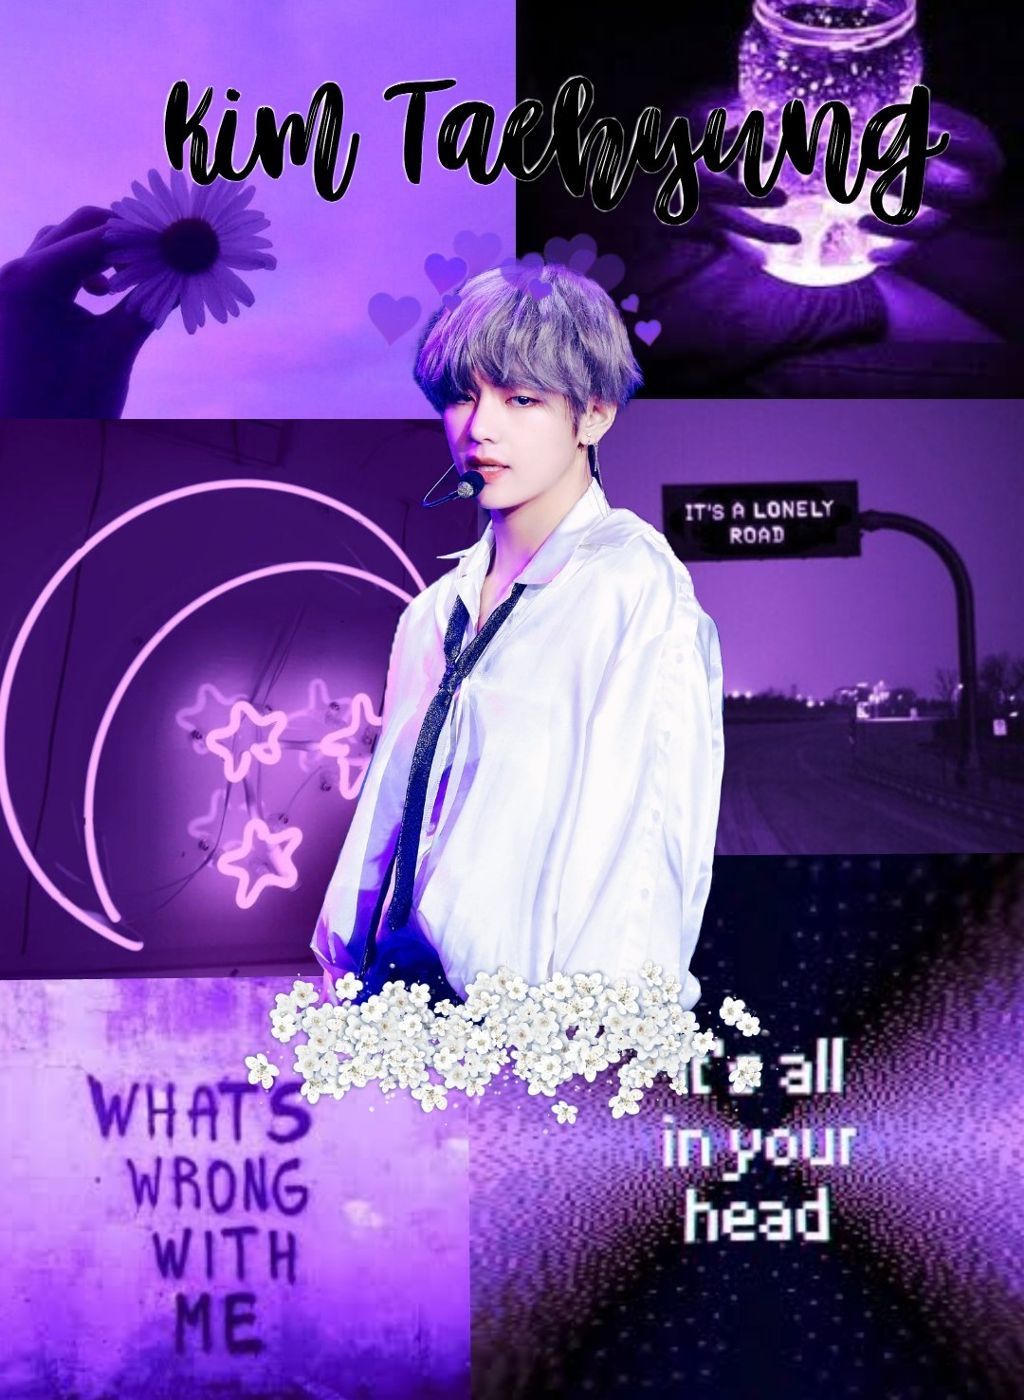 Perfect Bts Purple Aesthetic Wallpaper Desktop You Can Get It At No Cost Aesthetic Arena